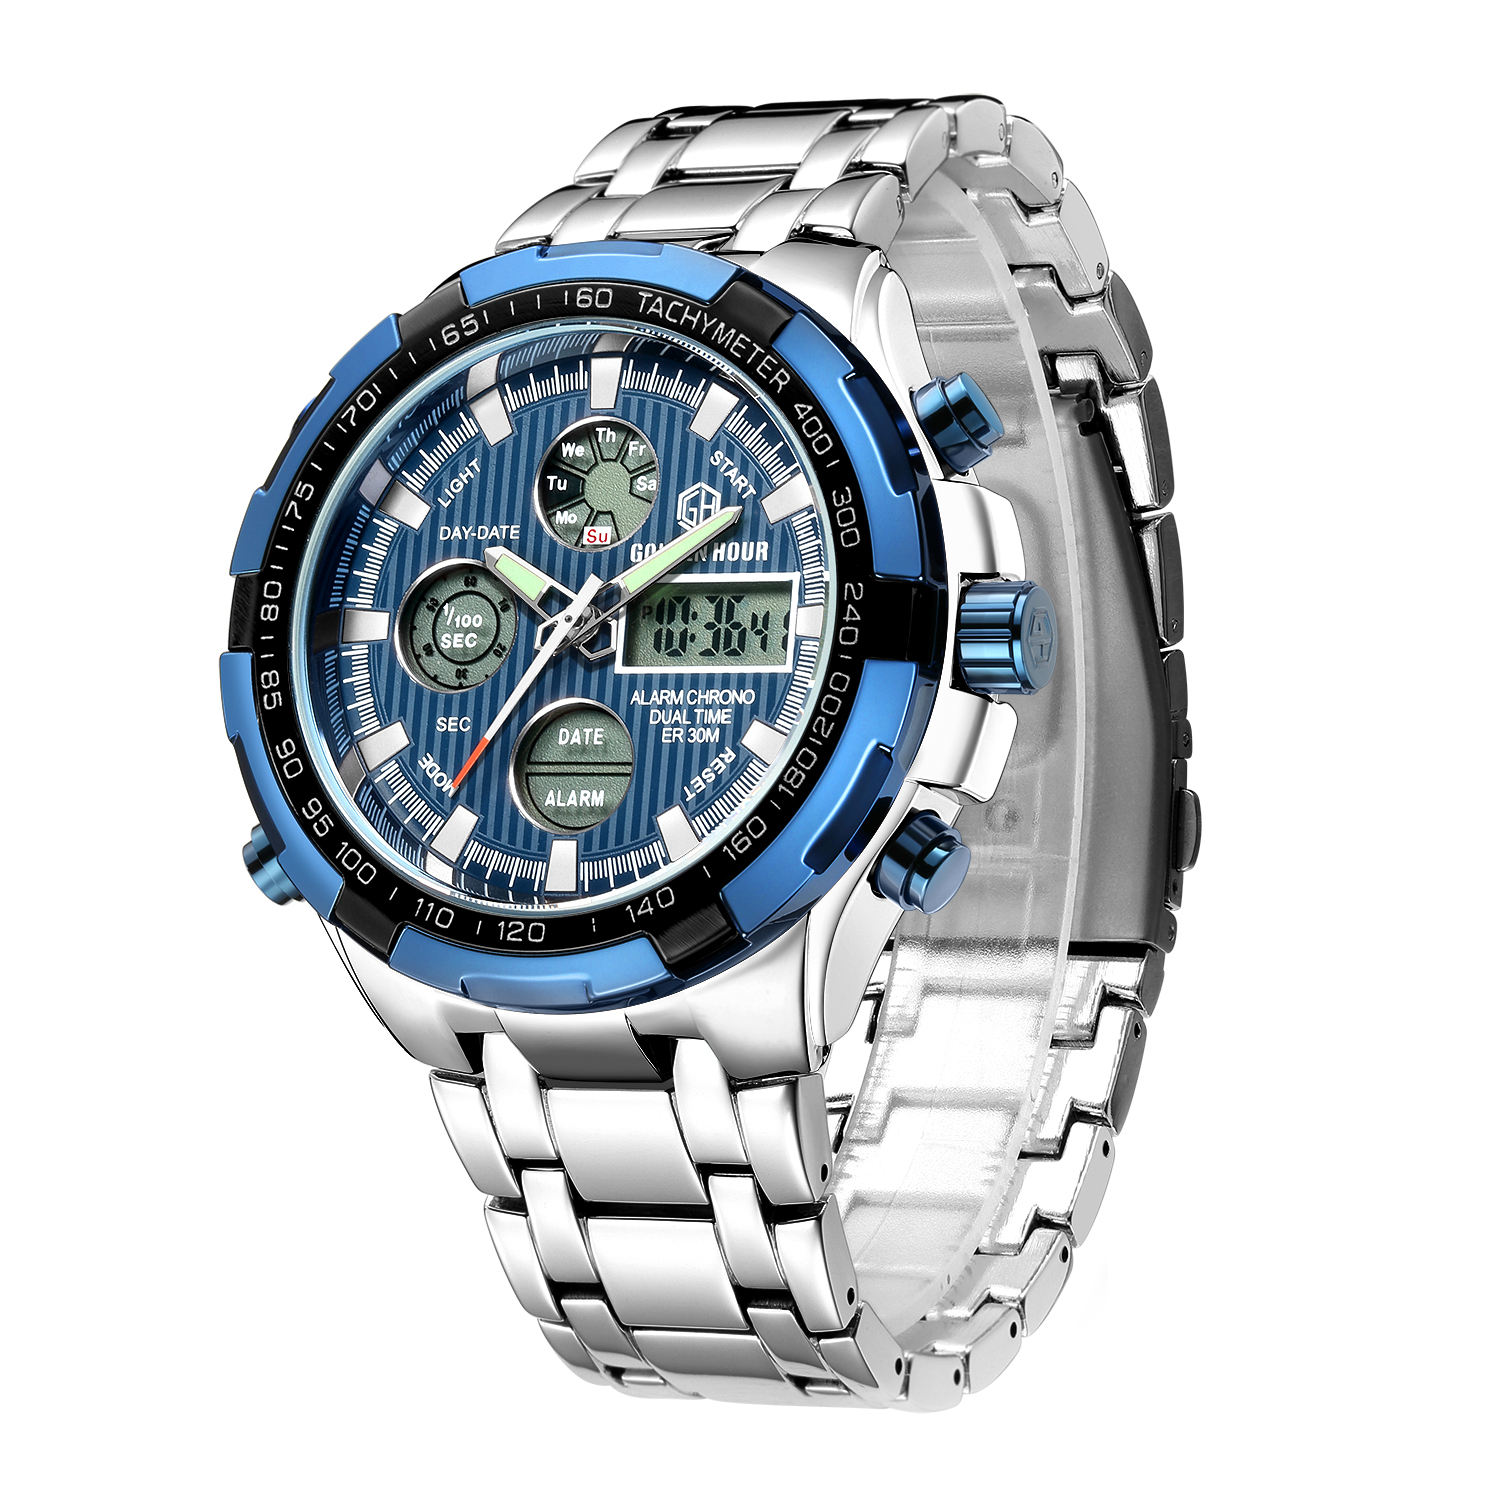 GOLDEN HOUR GH-108-S-BE Mens Stainless Steel Digital Analog Watches